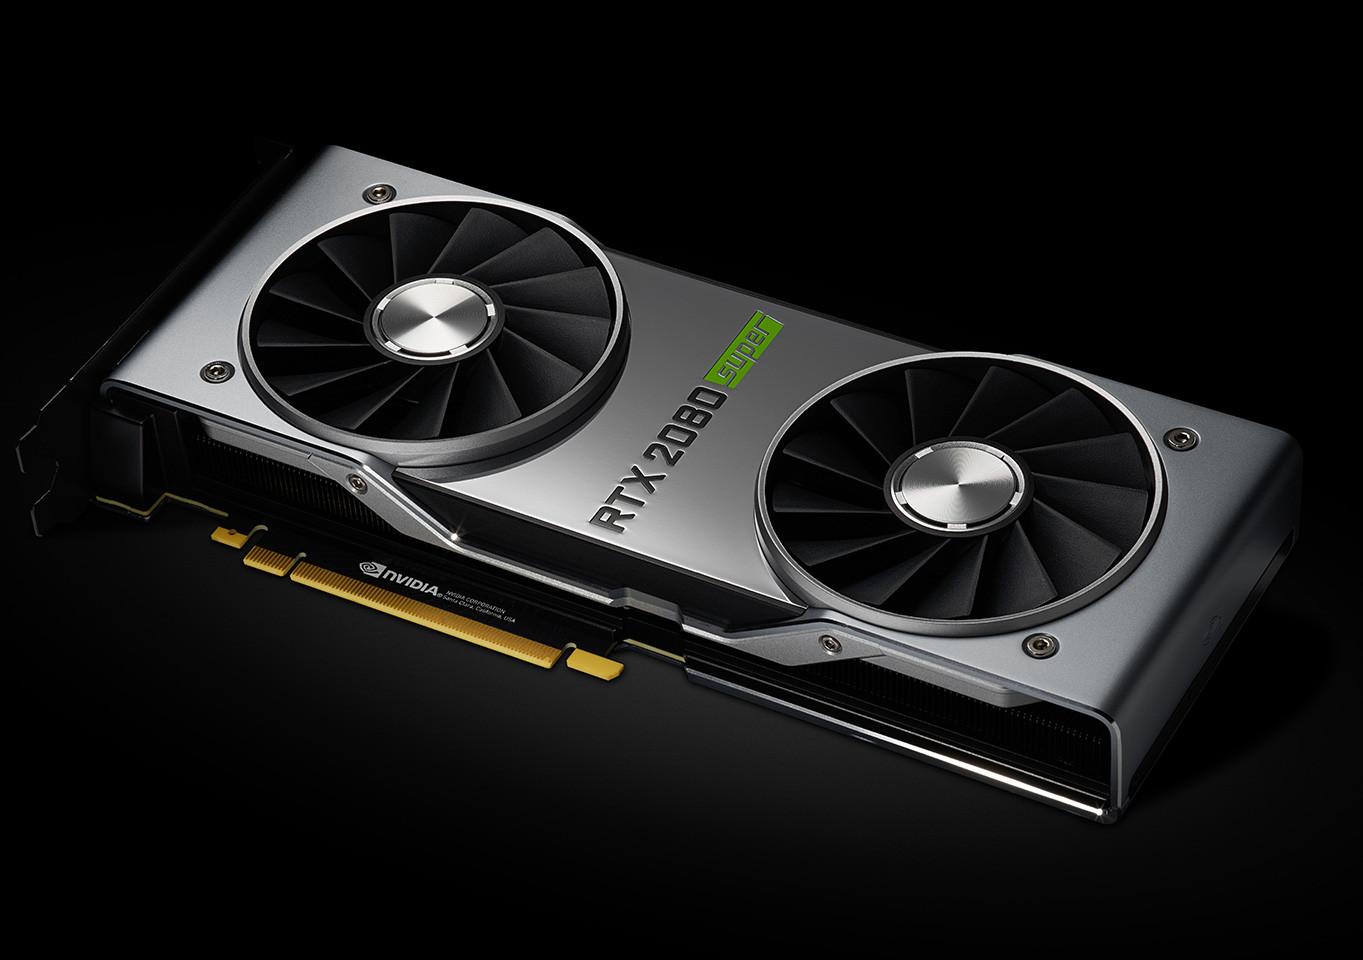 More information about "H Nvidia κυκλοφορεί την GeForce RTX 2080 Super"